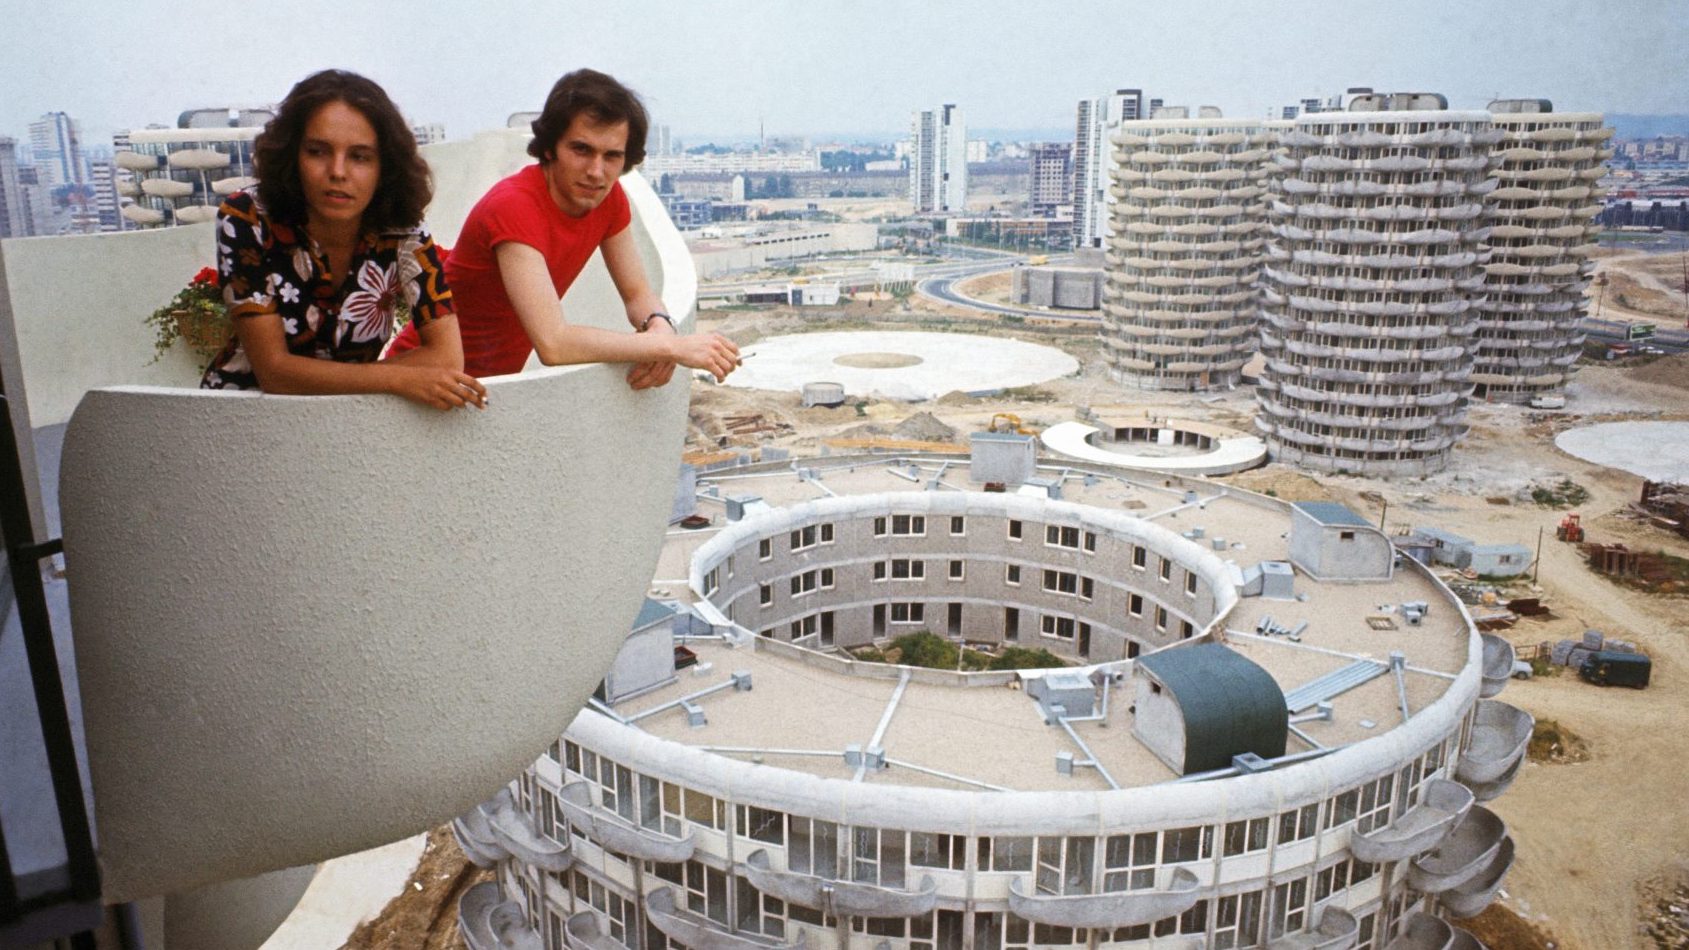 The new neigbourhood of Créteil in the suburbs of Paris gave birth to Les Choux – the Cabbages – in 1973. Photo: Michele Laurent/Gamma-Rapho/Getty